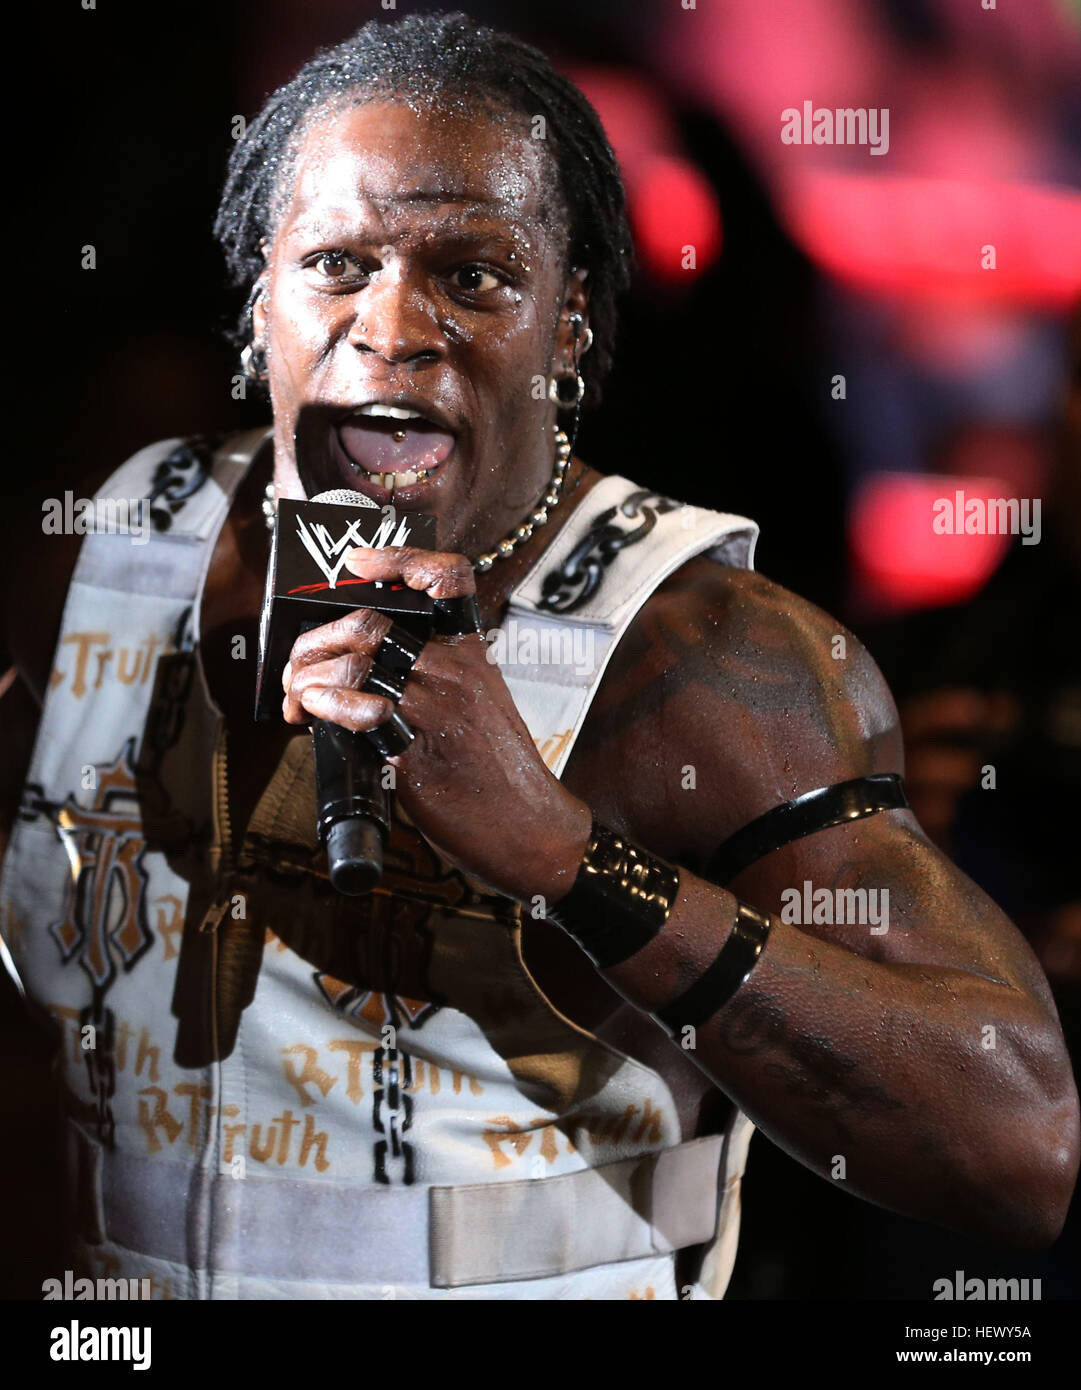 DURBAN, SOUTH AFRICA - AUGUST 01: R-Truth during the WWE World Tour 2013 at Westridge Park Stadium on August 01, 2013 in Durban, South Africa. (Photo Stock Photo